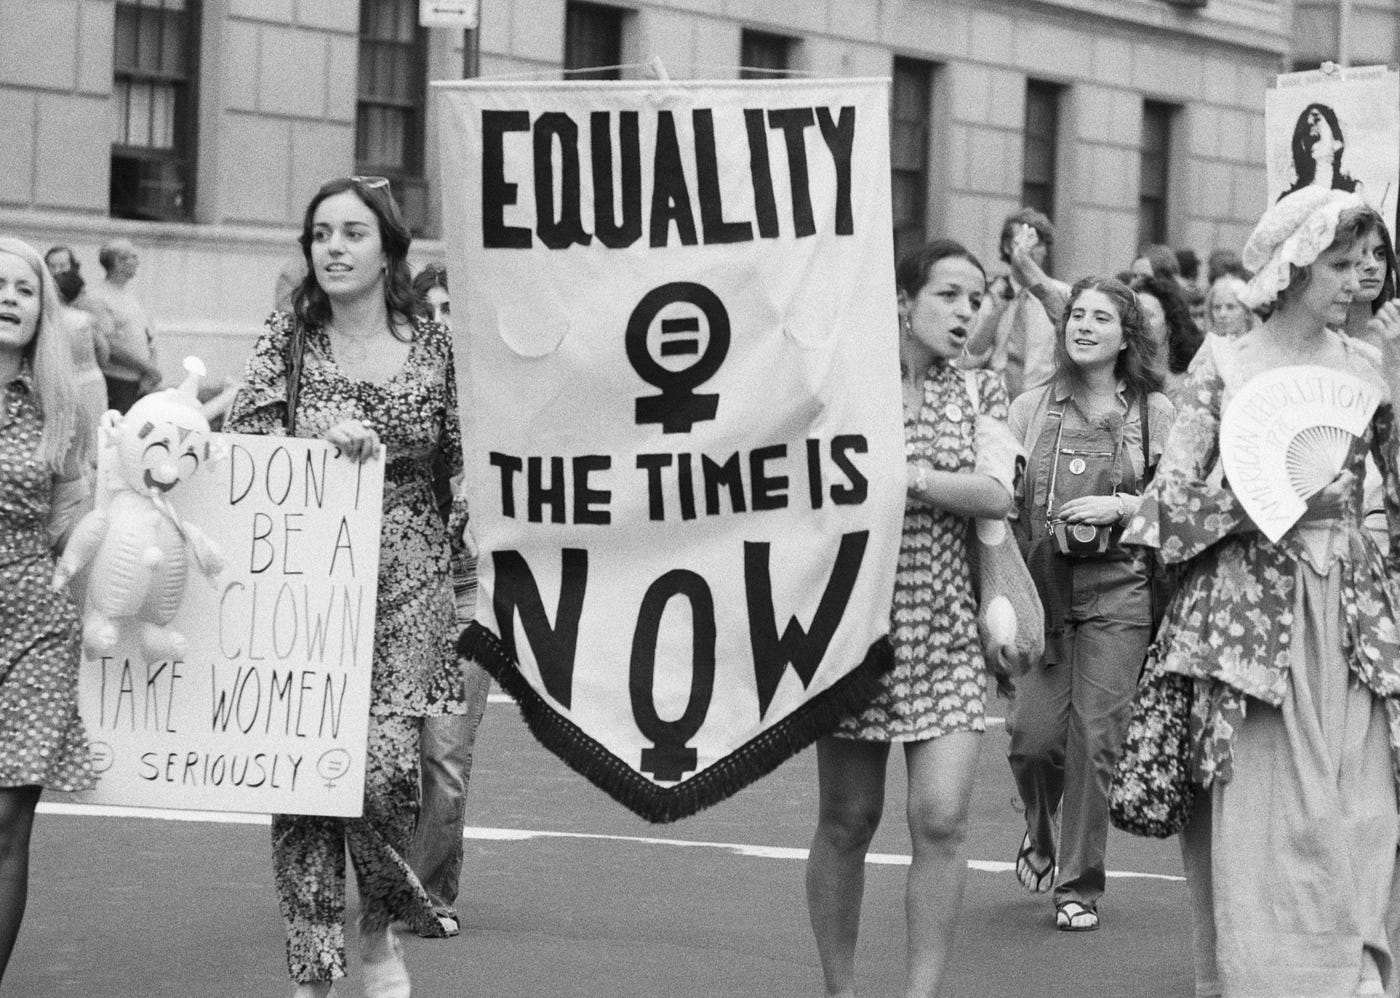 Breaking Barriers: The Inspiring History of Women's Rights, by AI bees